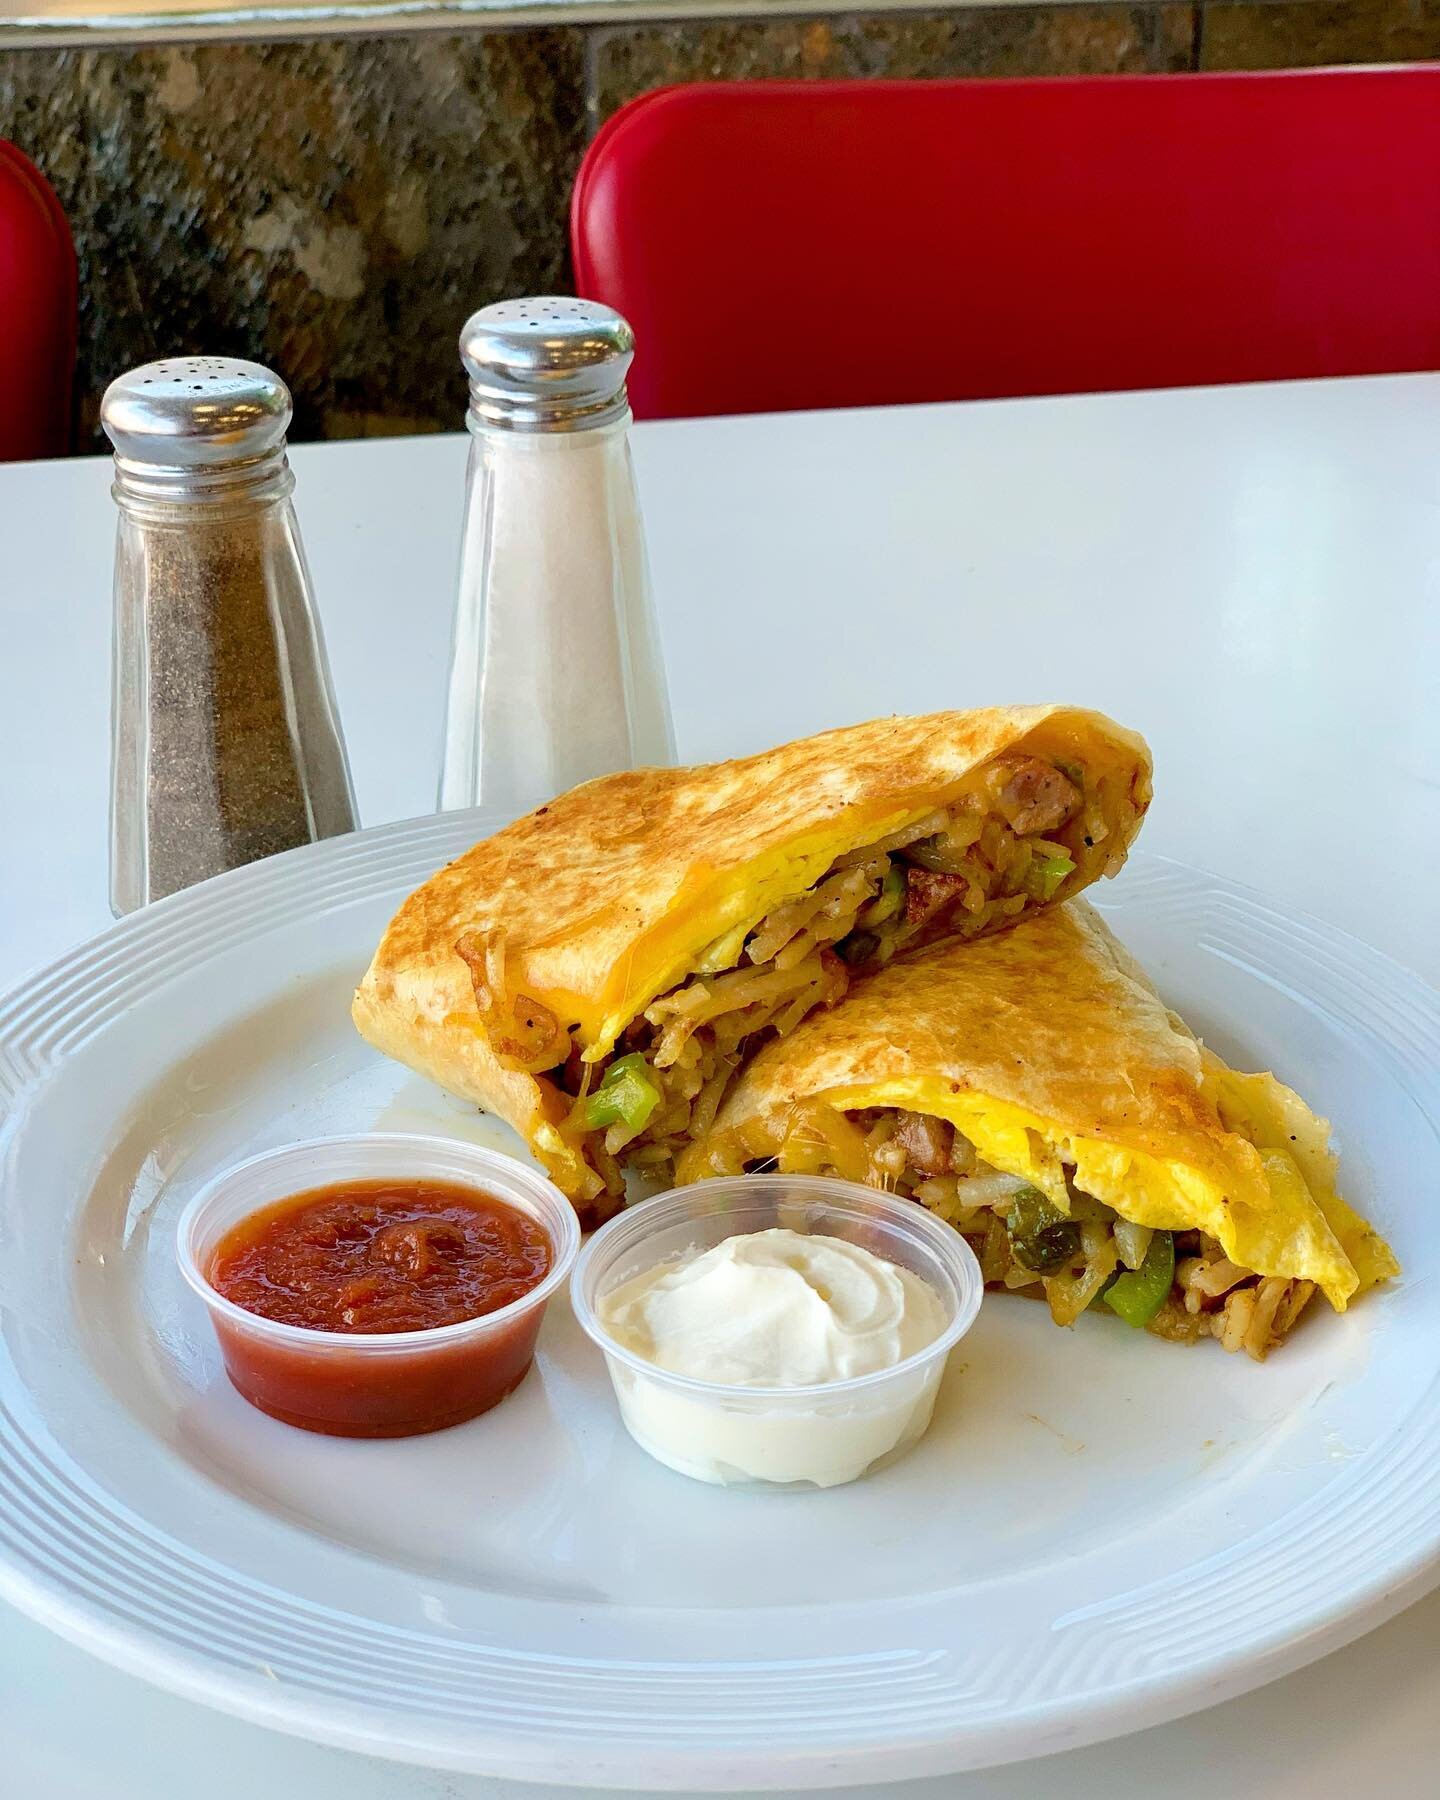 Breakfast Burrito anyone?? 🌯 a filling &amp; delicious way to start off the day! 😋 
 ⠀⠀⠀⠀⠀⠀⠀⠀⠀⠀⠀⠀
This one is from @flynnseats is filled with hash browns 🥔, eggs 🍳 , sausage 🥓, bell peppers 🫑 , onion 🧅 and cheese 🧀 with a side of salsa &amp; 